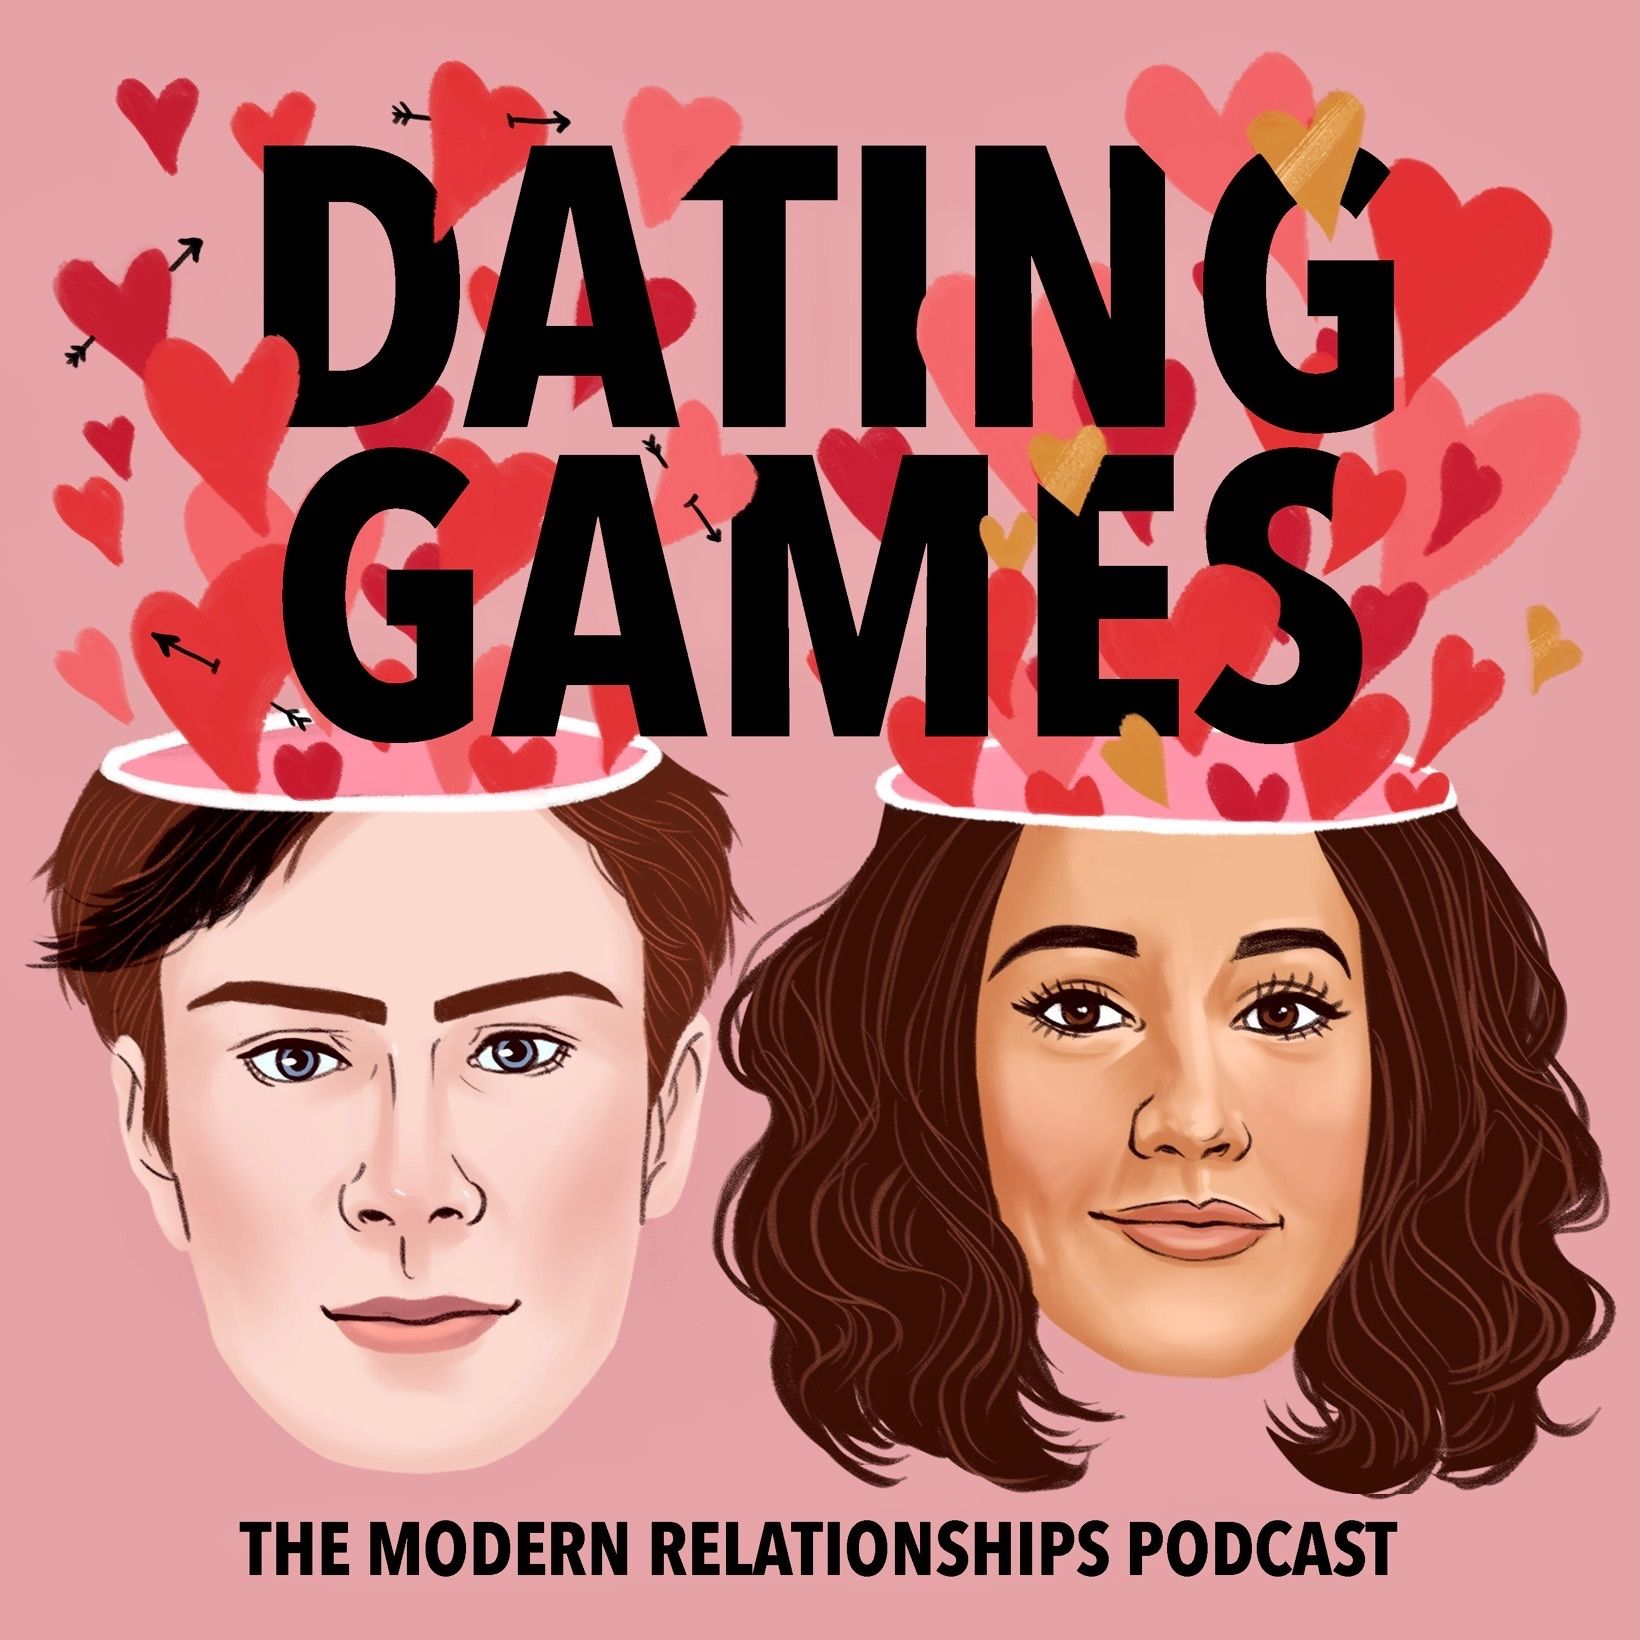 S4 Ep11: Meeting the family on the first date with Kristal DeSantis 😳